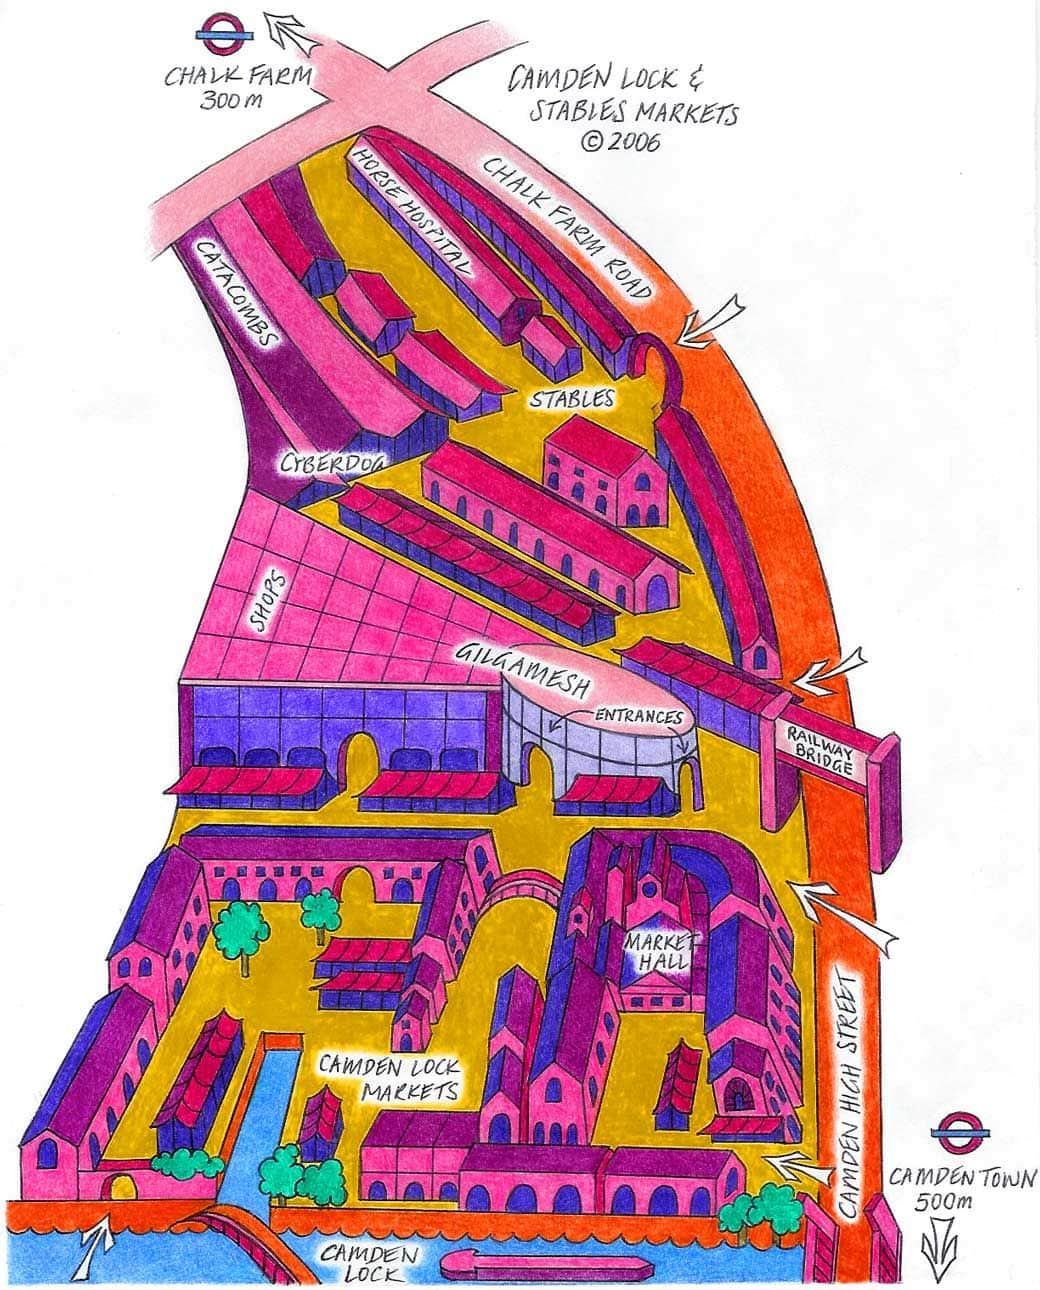 A coloured map of the Camden Town markets